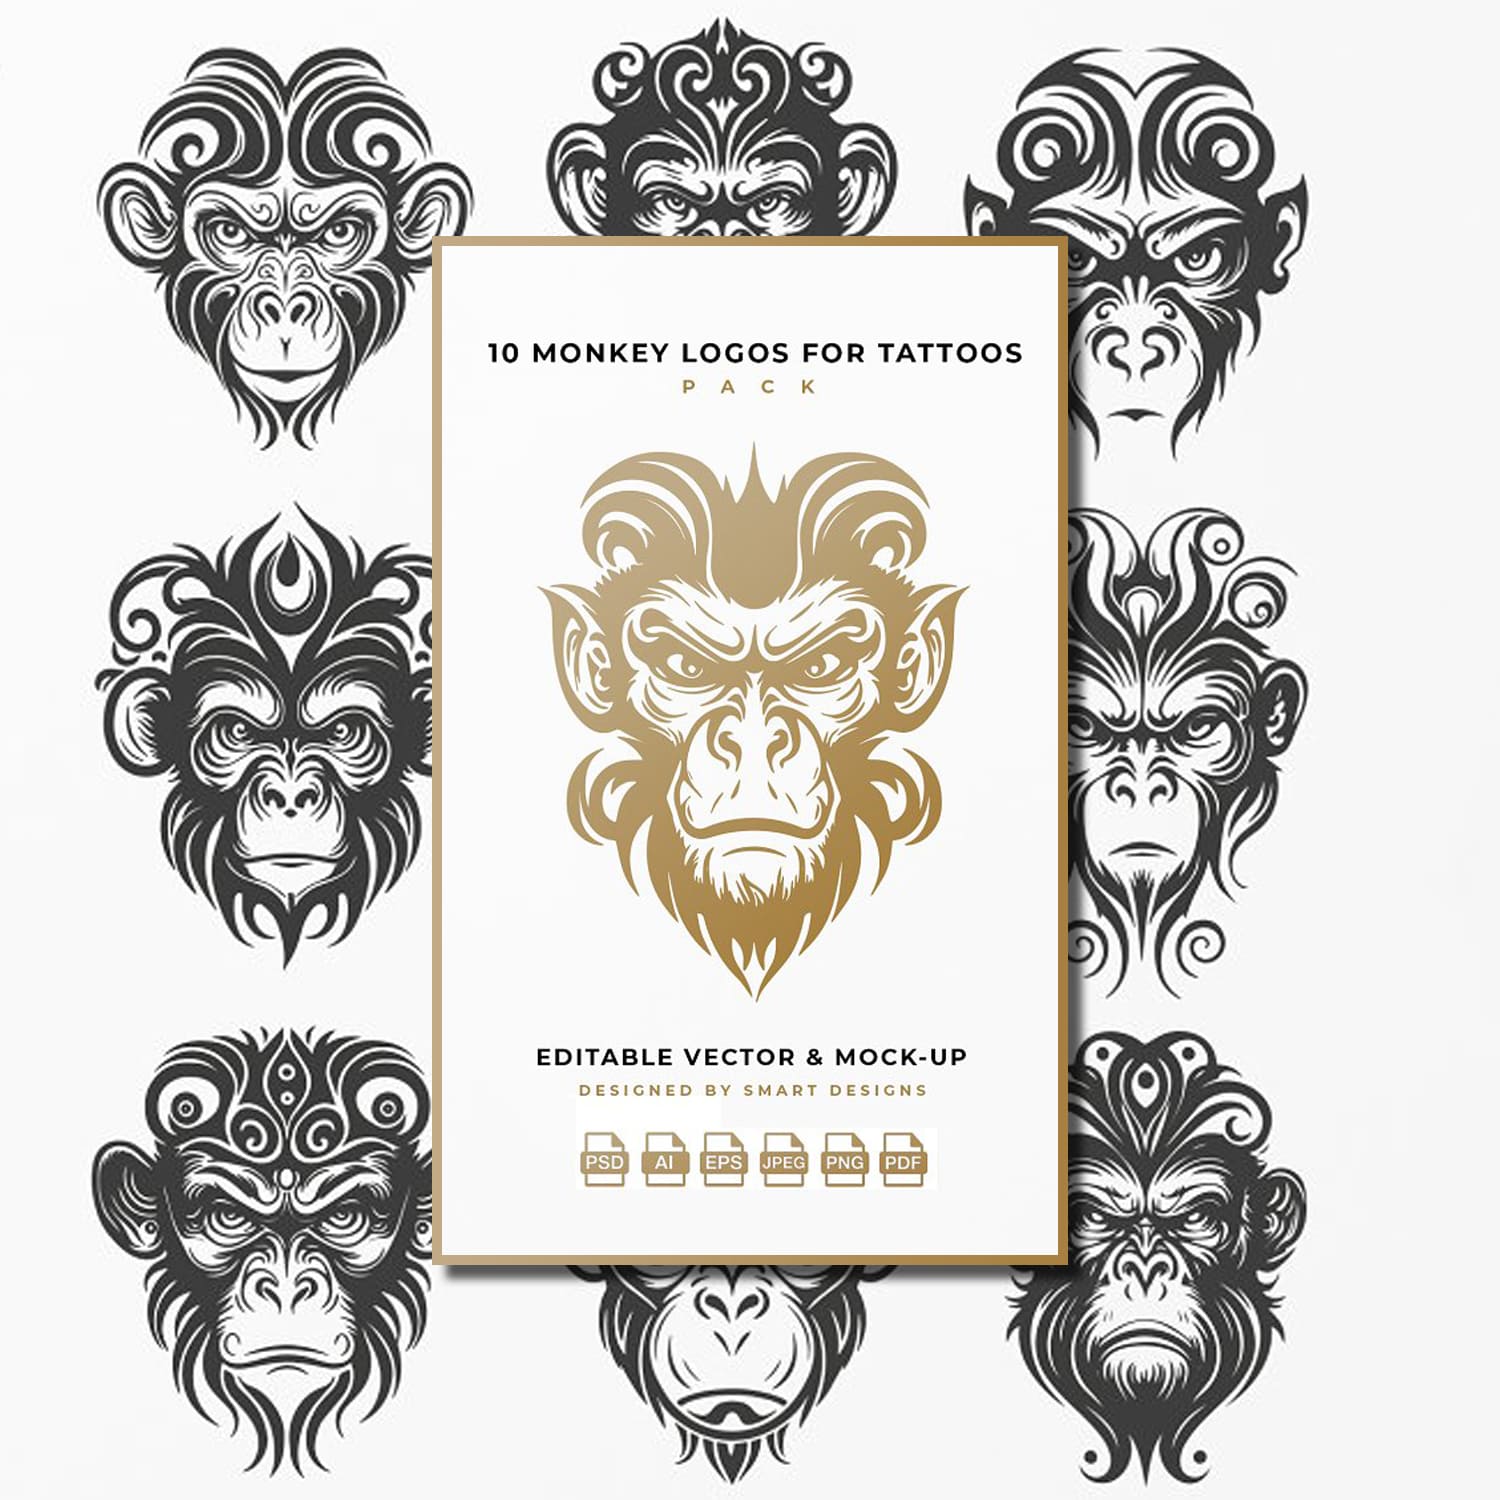 Faces of monkeys expressing different emotions for a tattoo.